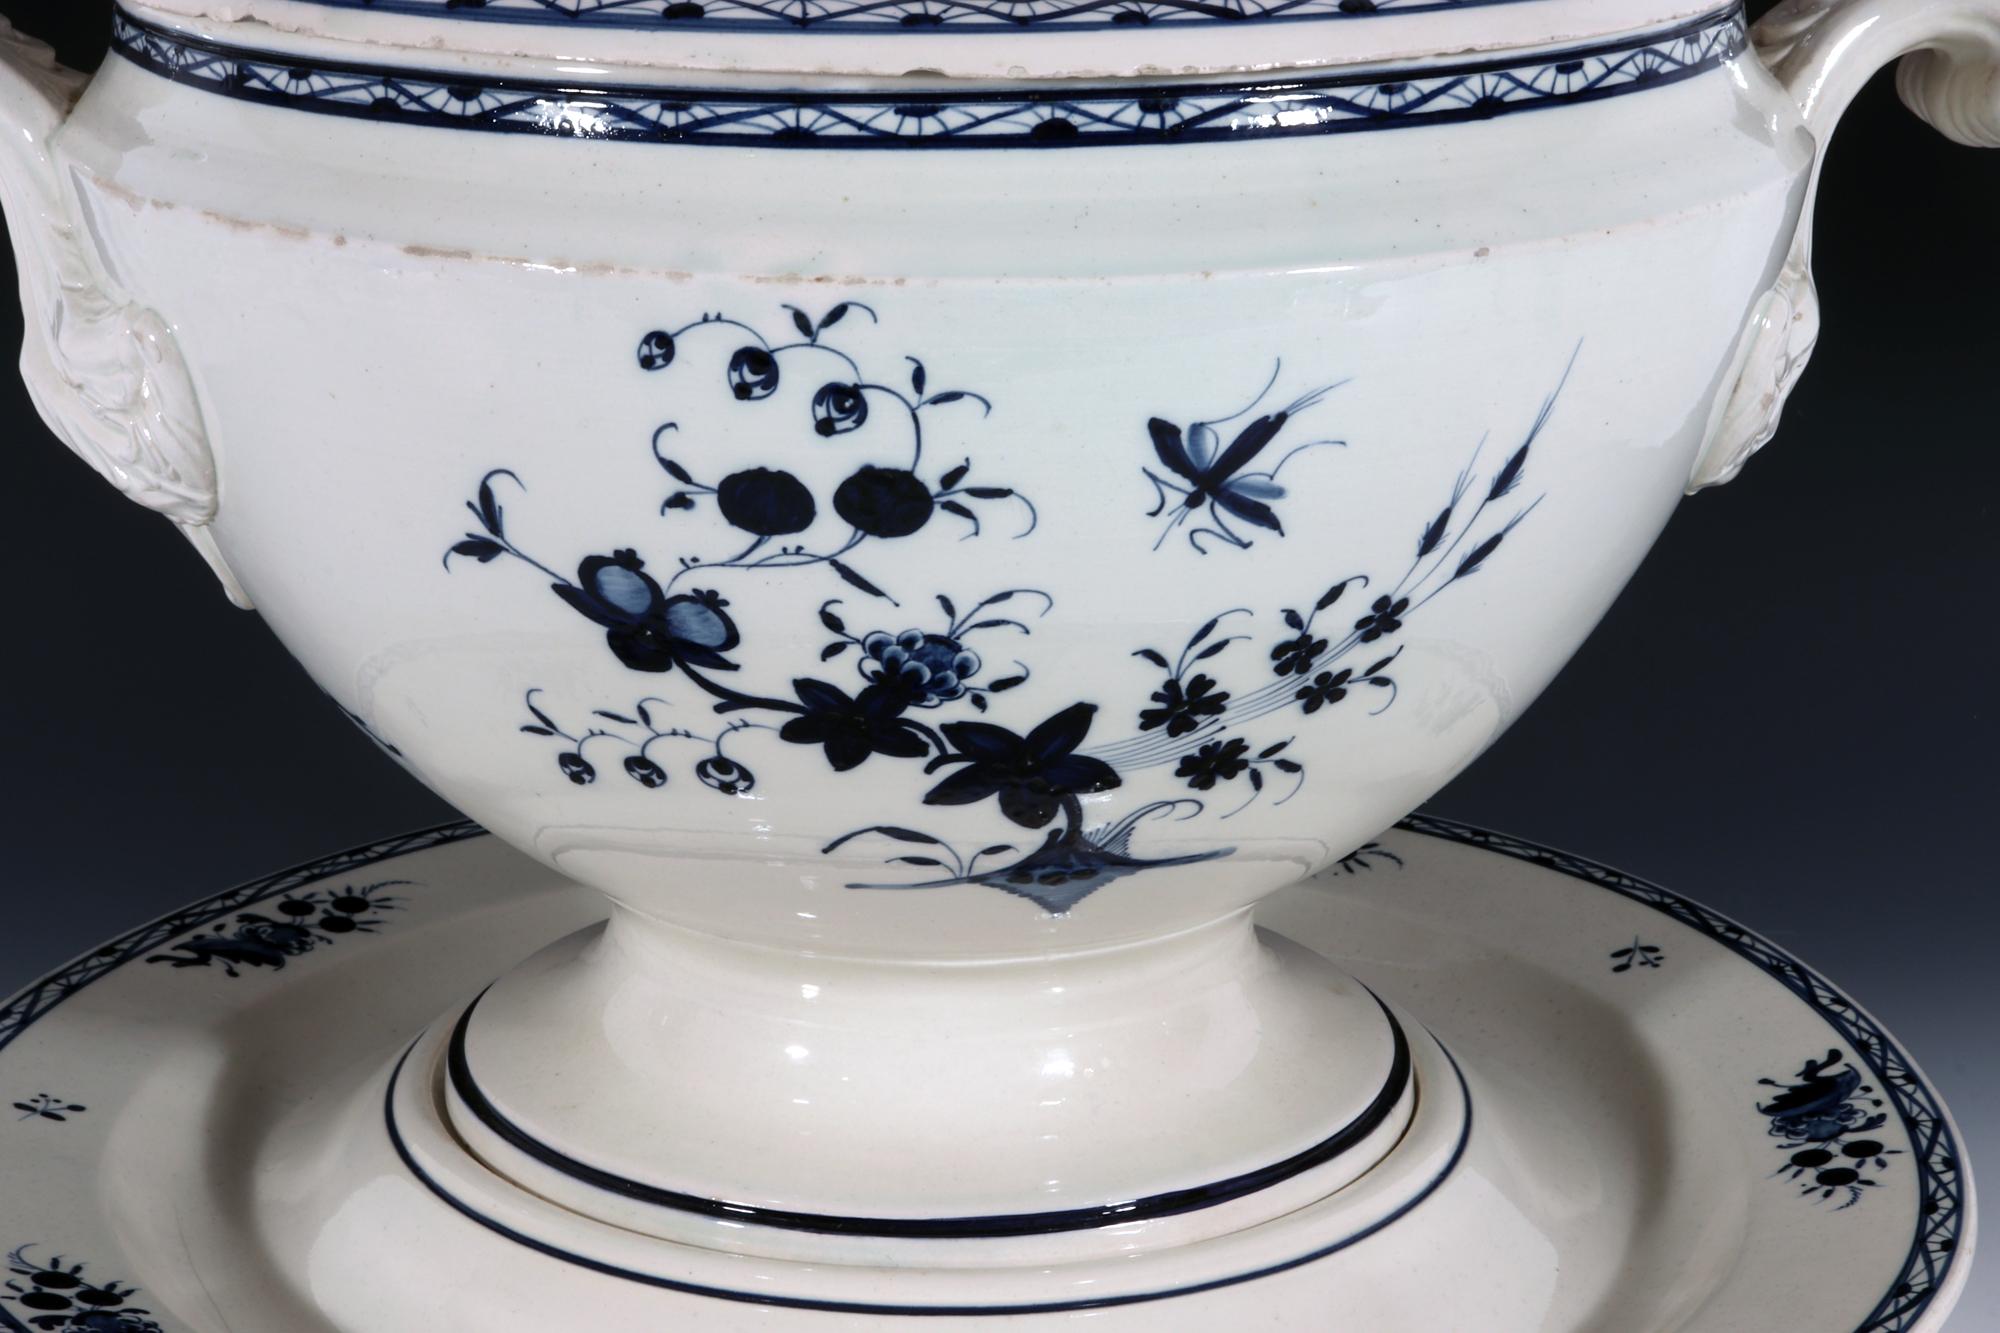 Continental Pottery Large Soup Tureen, Cover & stand,
Nimy Factory, Belgium,
Early 19th century.

The large circular tureen, cover and stand are painted in underglaze blue with floral designs in the Chinese style. On the tureen body to the front